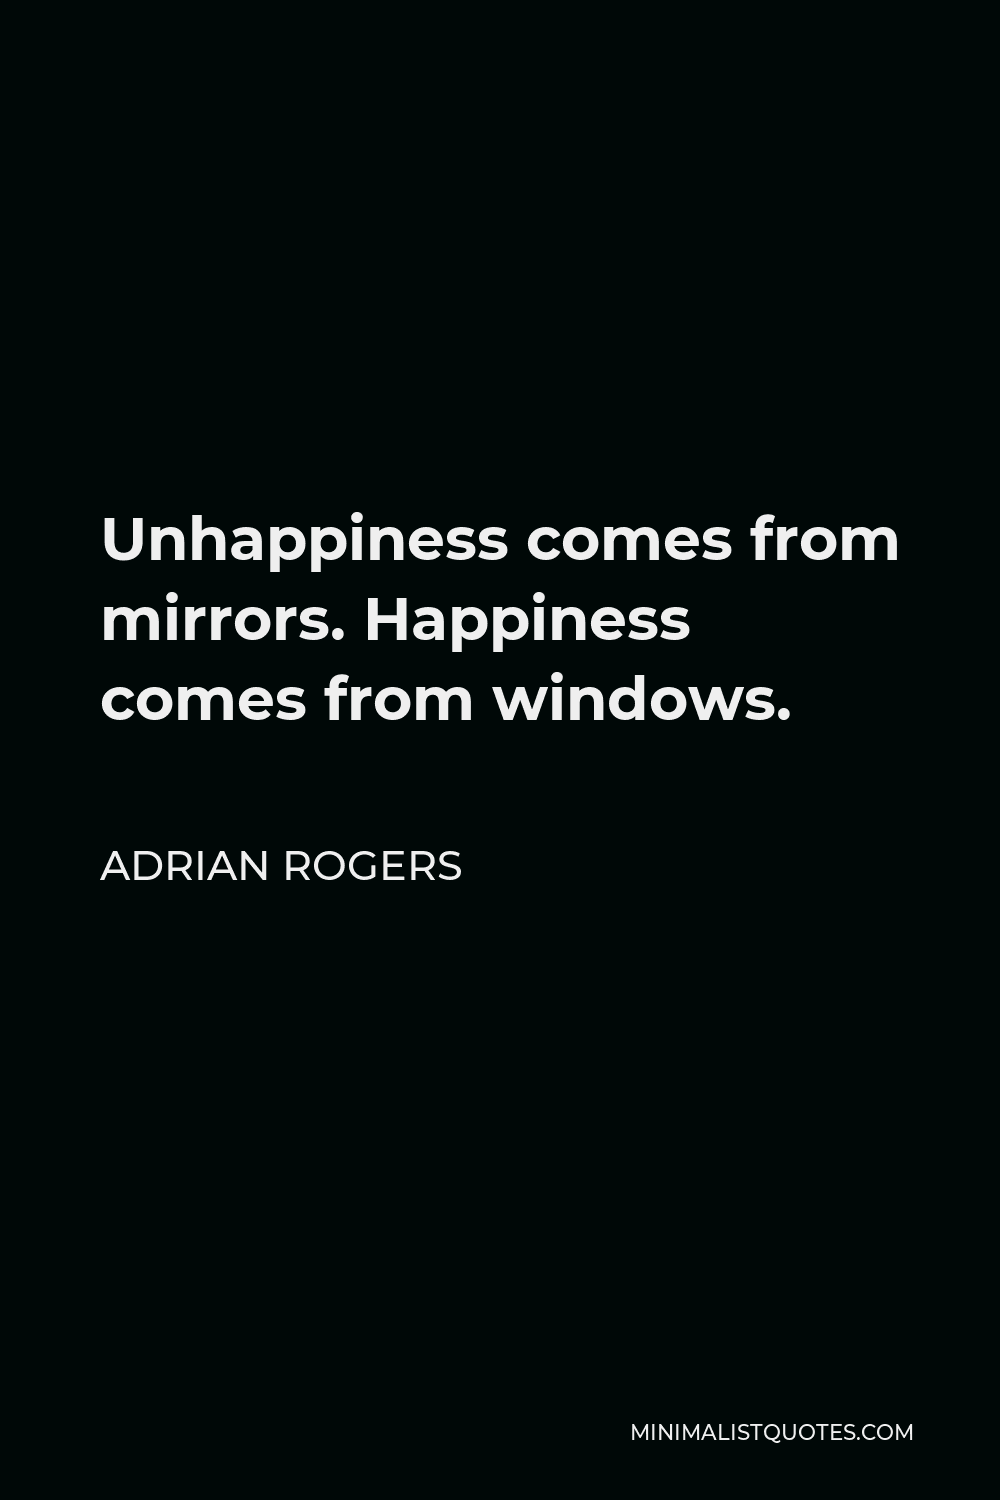 Adrian Rogers Quote - Unhappiness comes from mirrors. Happiness comes from windows.